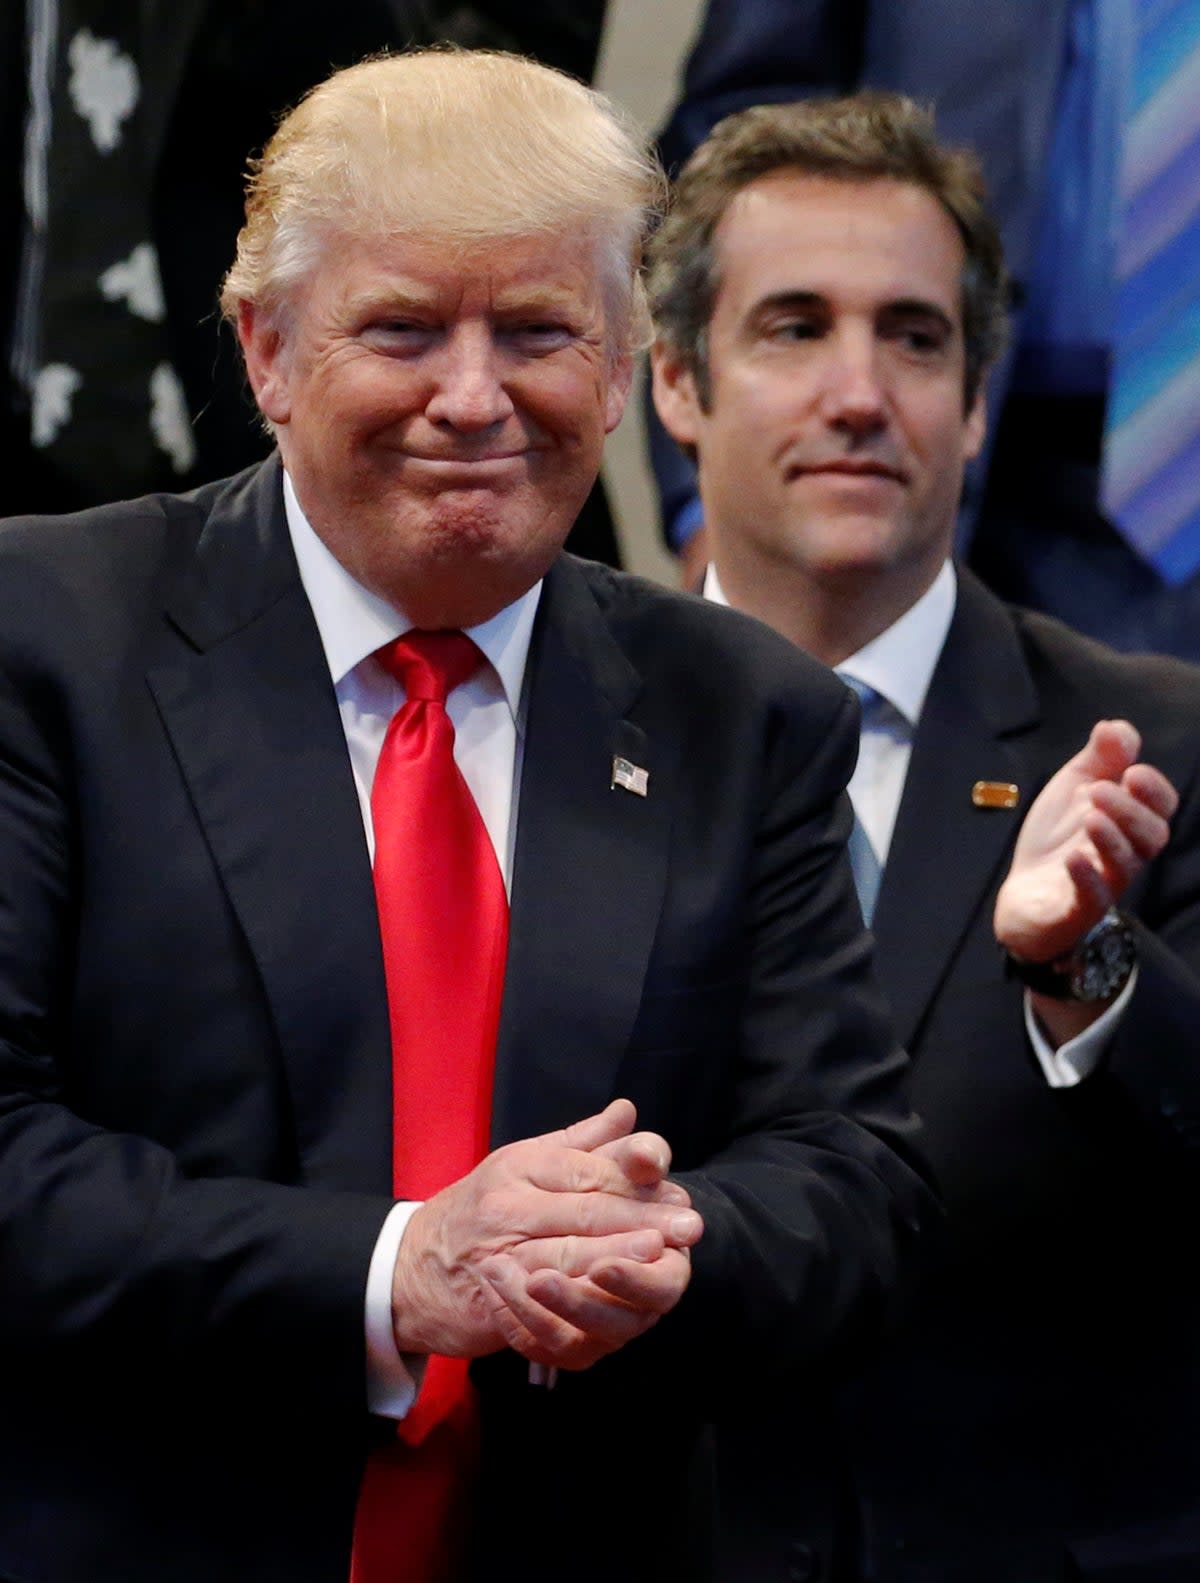 Michael Cohen and Donald Trump at an event in Ohio on 21 September 2016 (REUTERS)